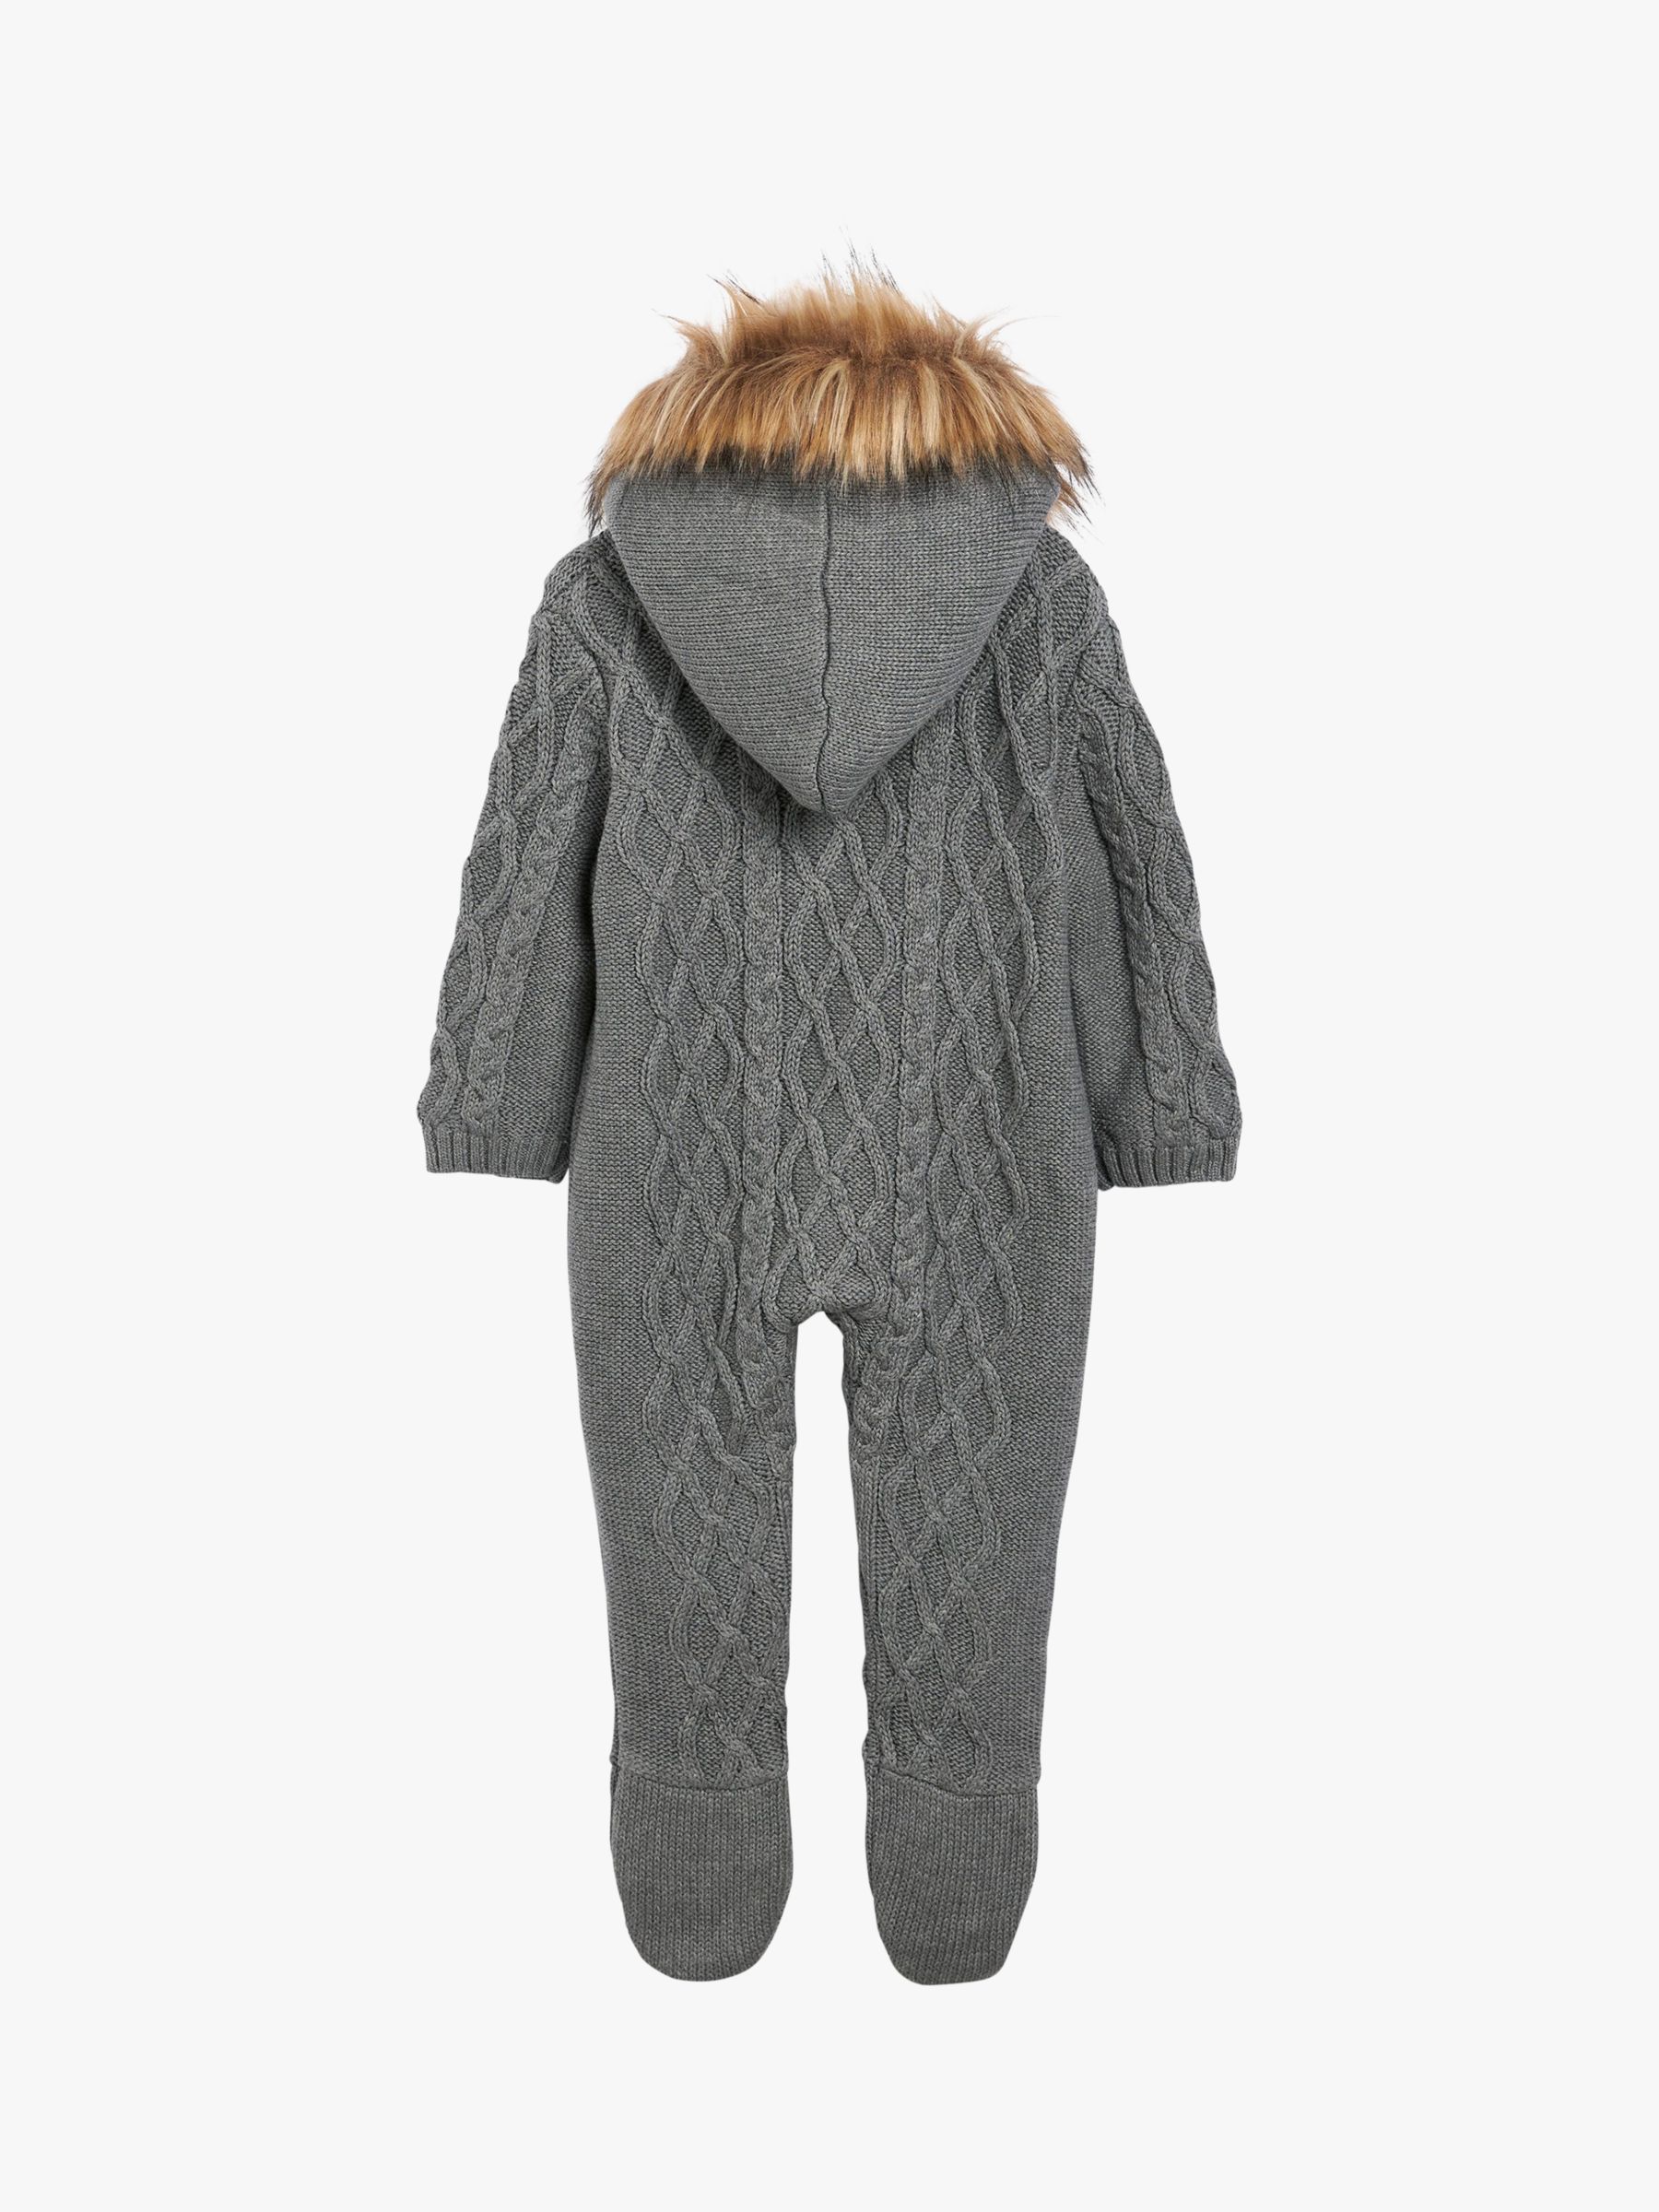 The Little Tailor Kids' Knitted Faux Fur Hood Romper, Charcoal Grey, 3-6 months